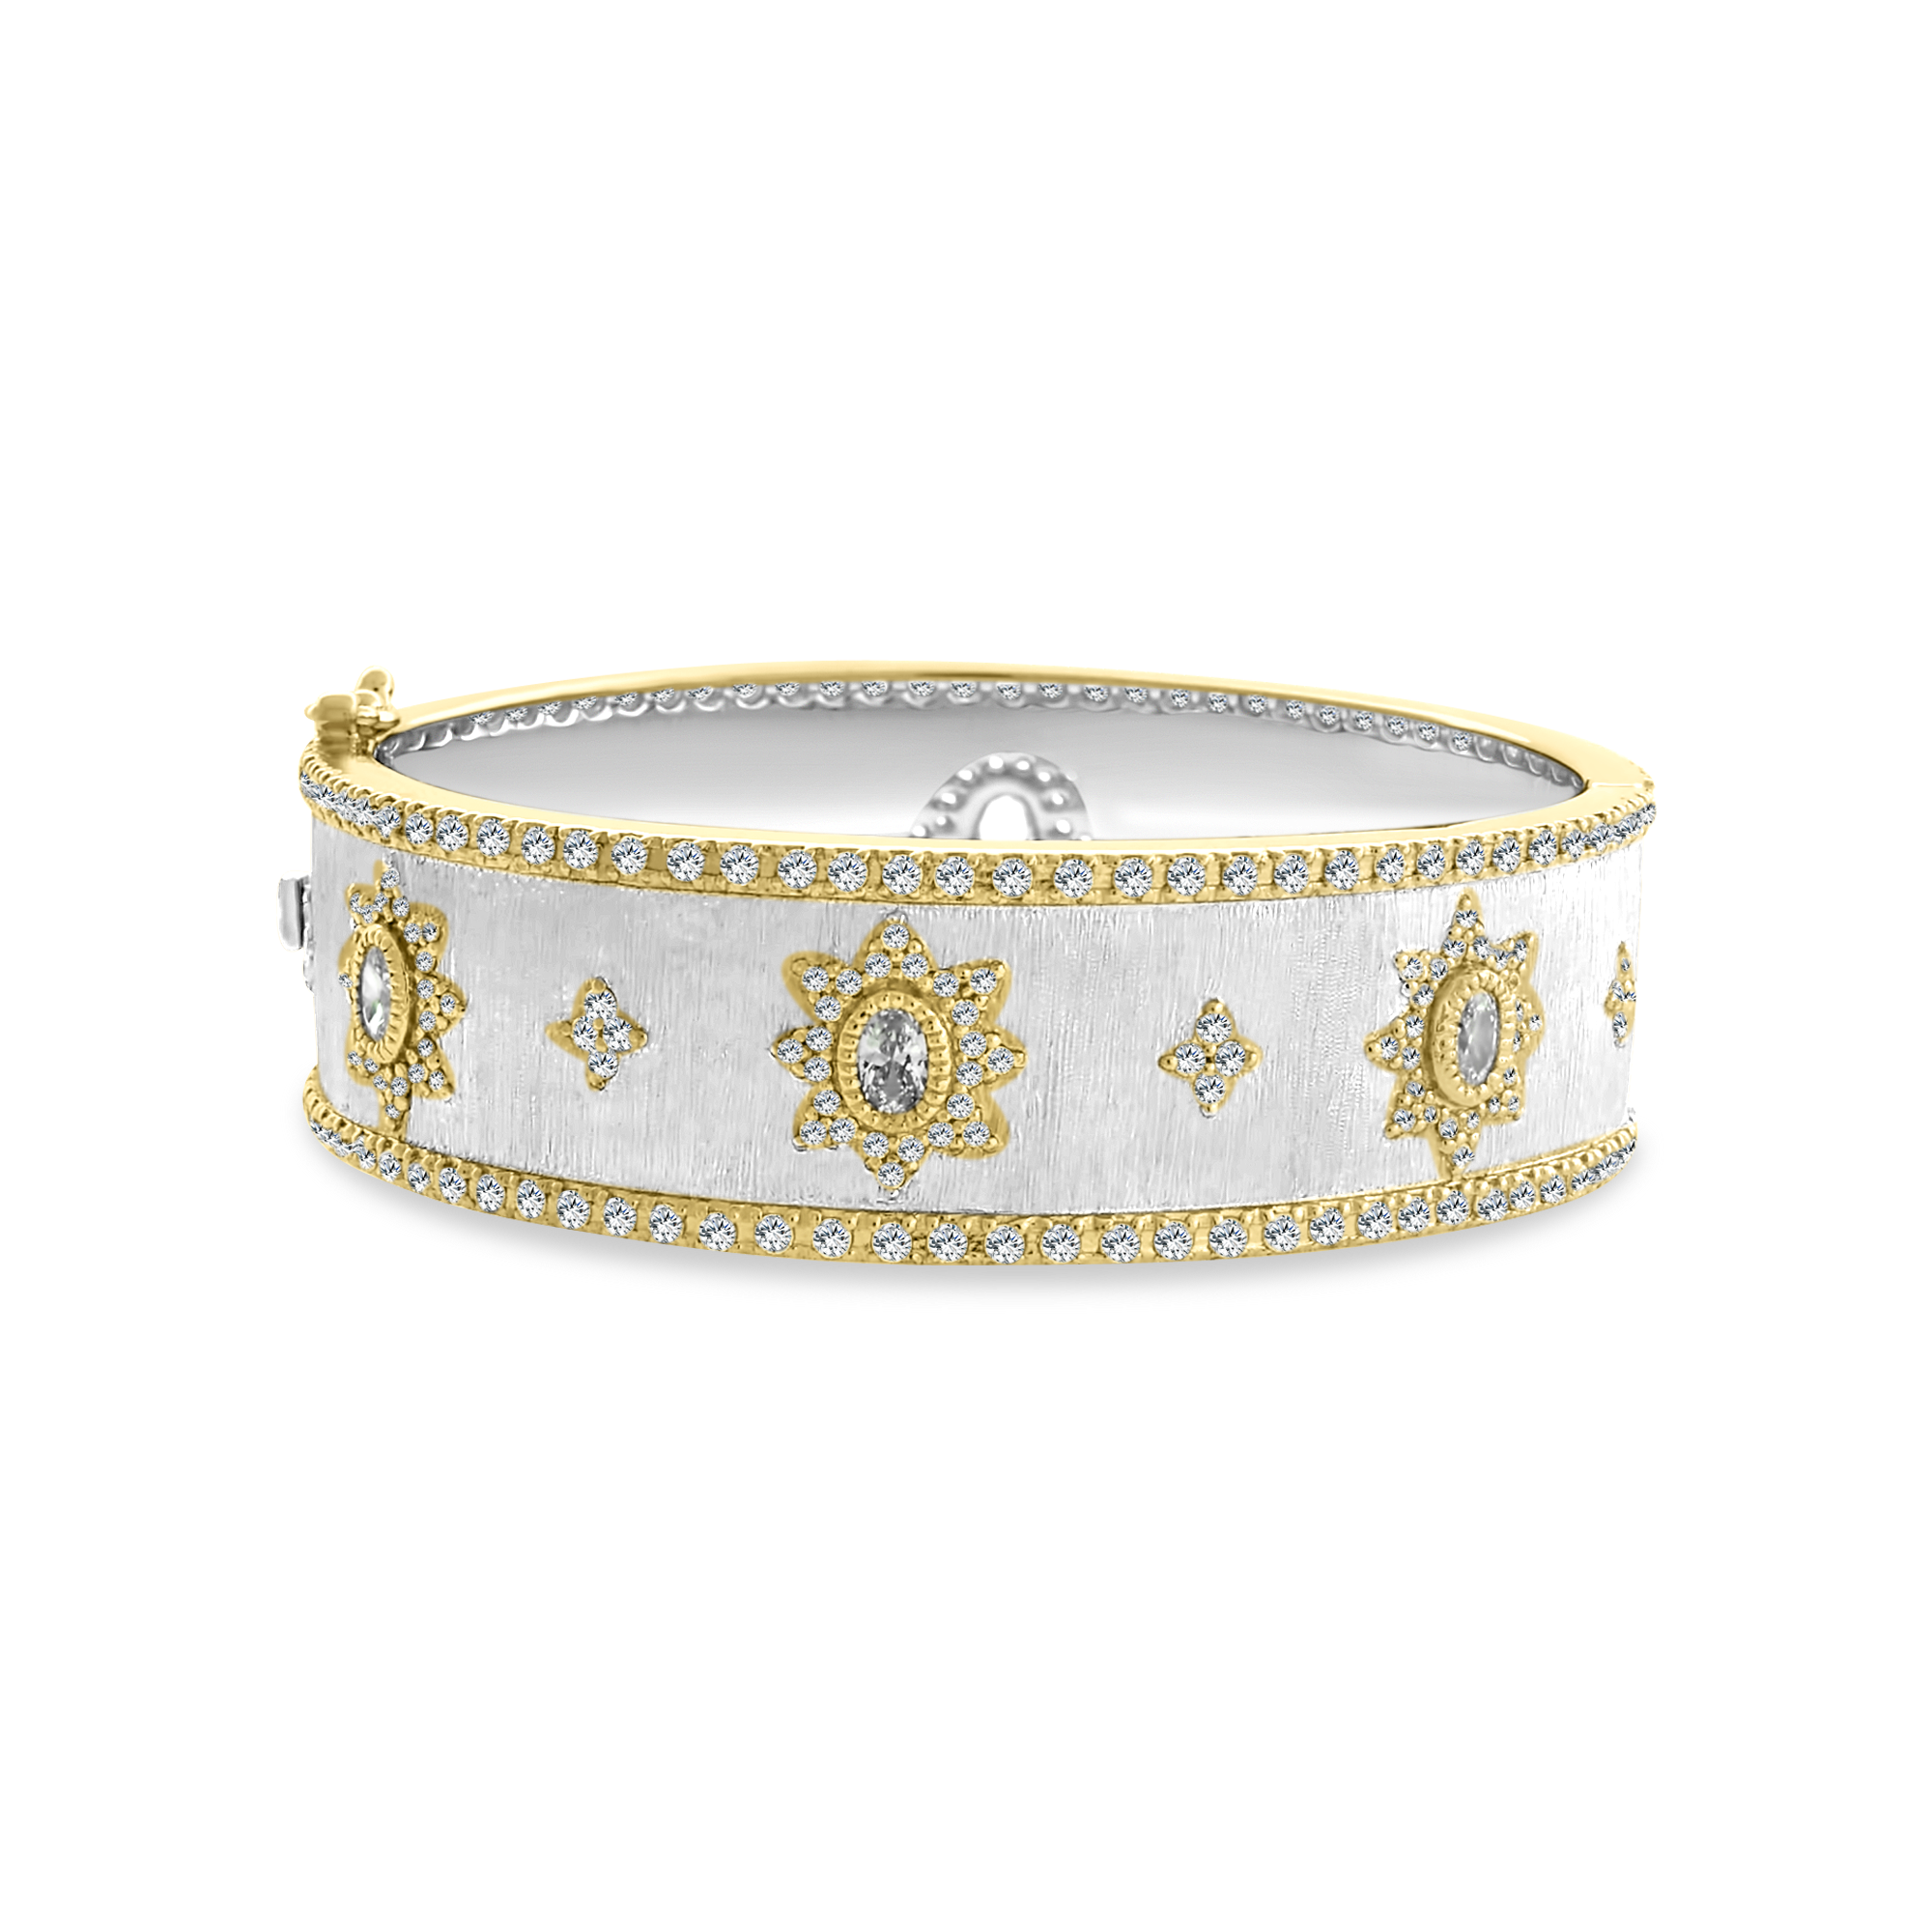 Silver 2-Tone Frosted Bracelet with Gold Details and Oval Stones